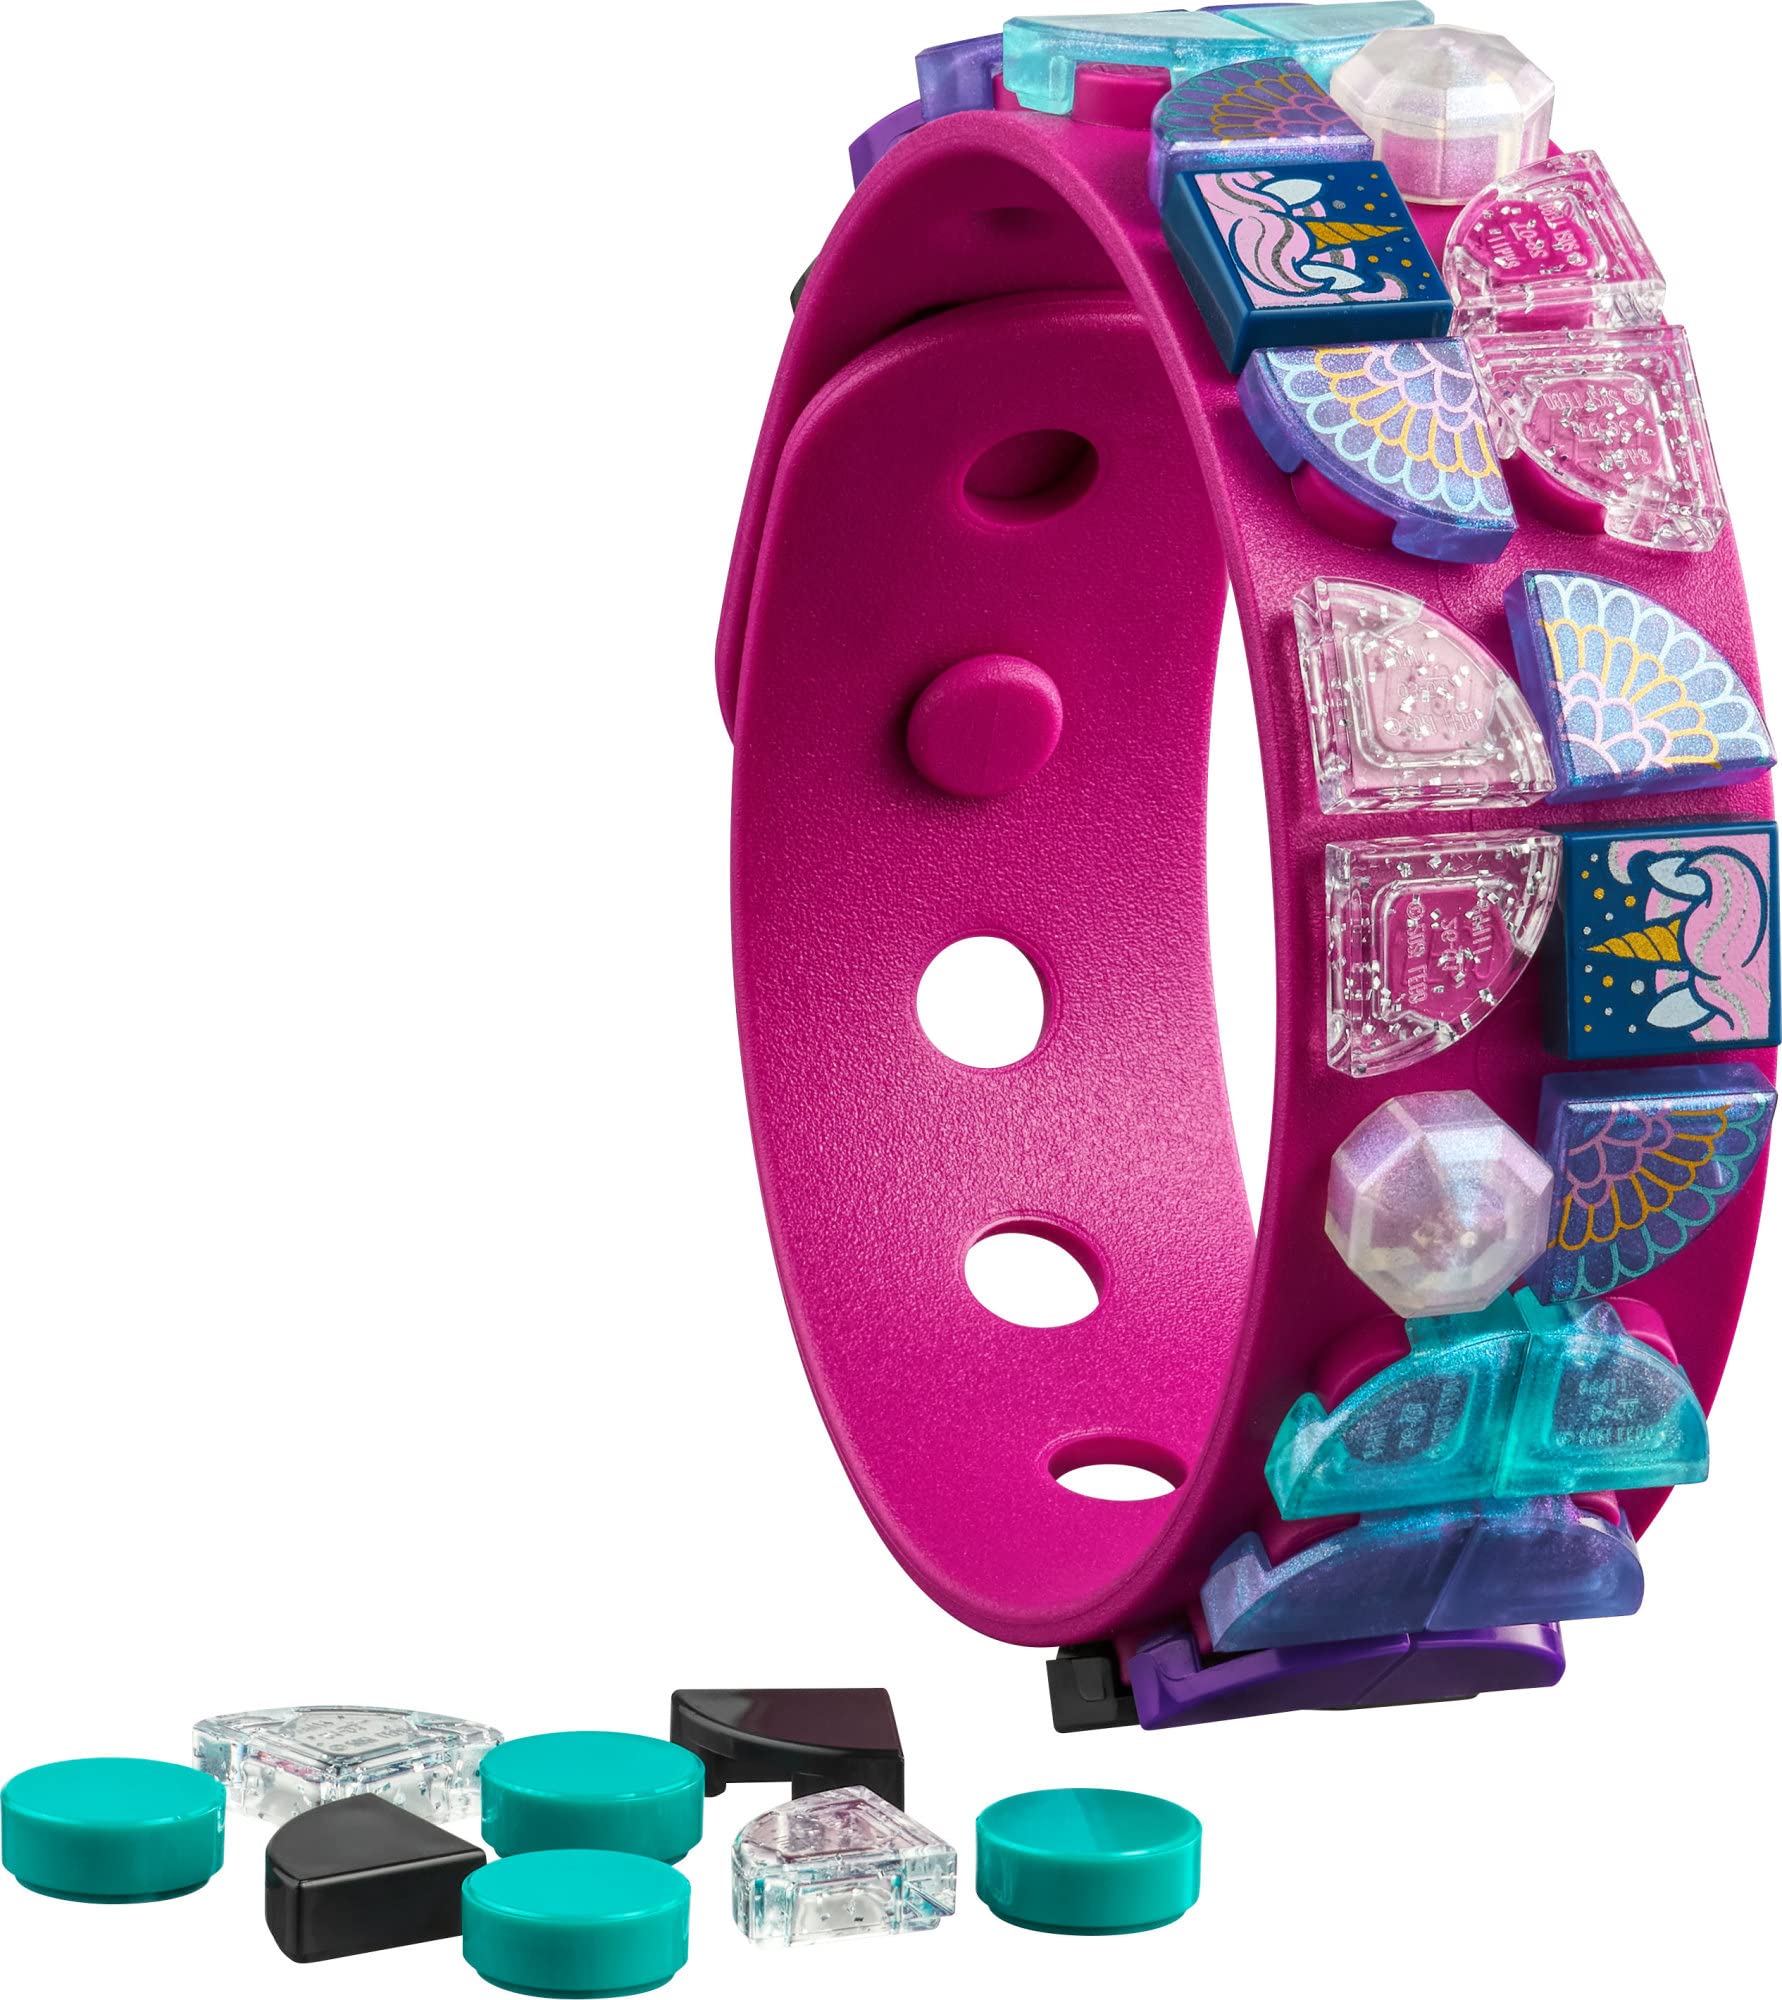 LEGO DOTS Unicorns Forever Toy Bracelet Making Kit 41802, Great Gift for Girls and Boys who Love Unicorns, DIY Crafts Jewelry Set with Sparkly Tiles, Creative Unicorn Toy, Jewelry Making Craft Set